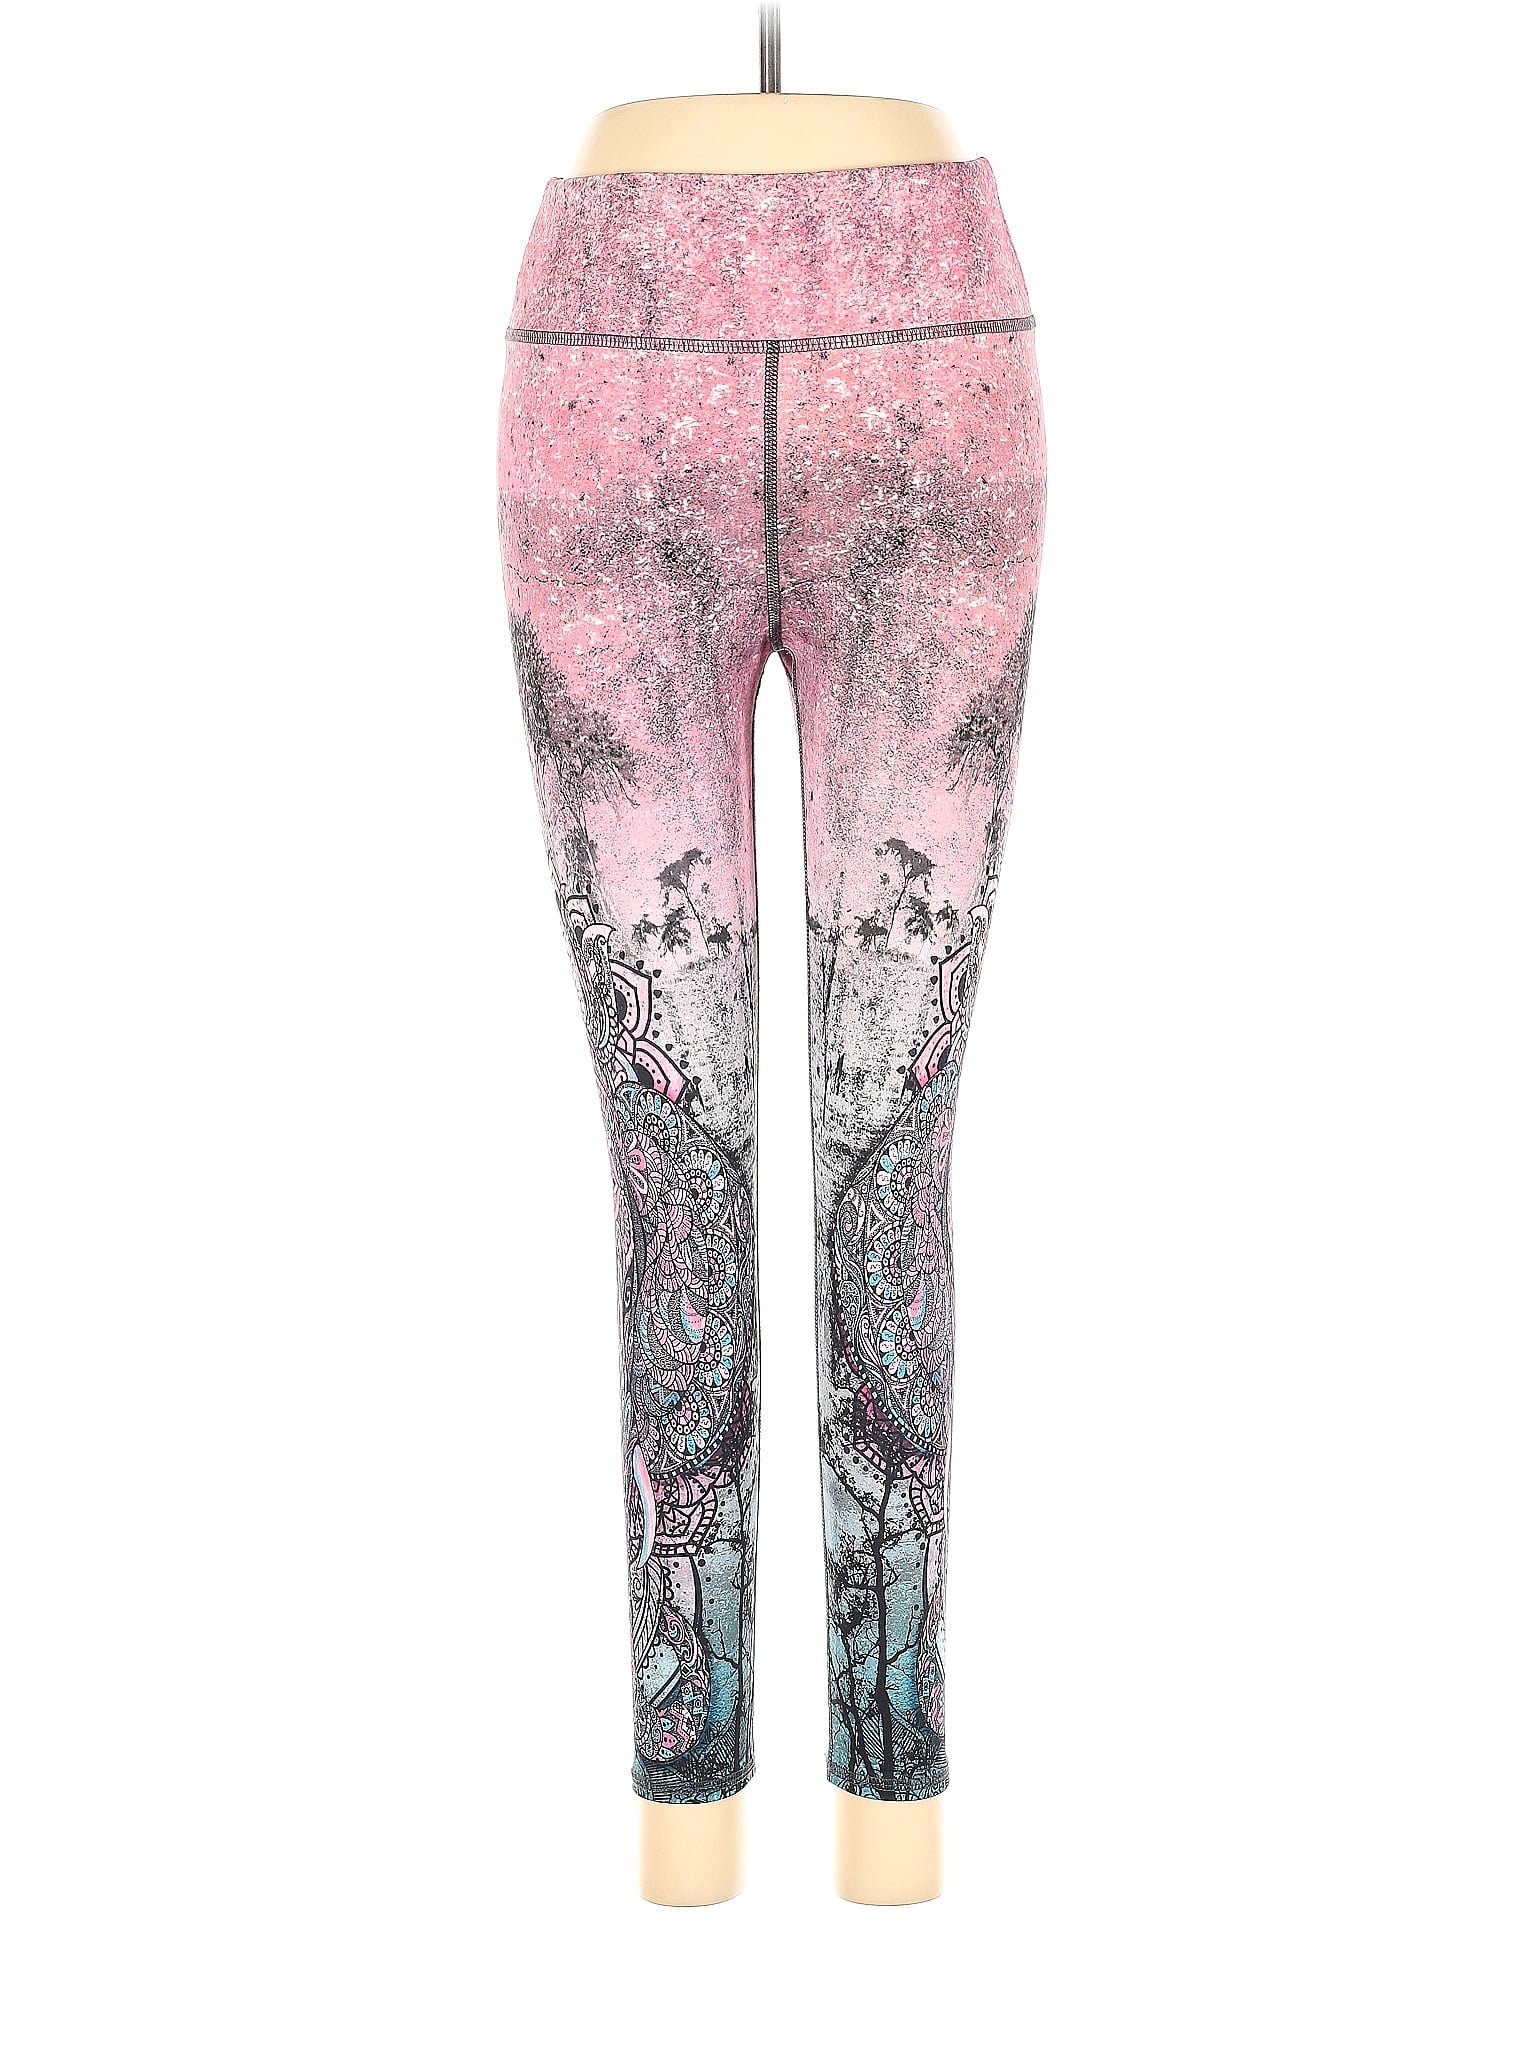 Evolution and Creation Multi Color Pink Active Pants Size S - 31